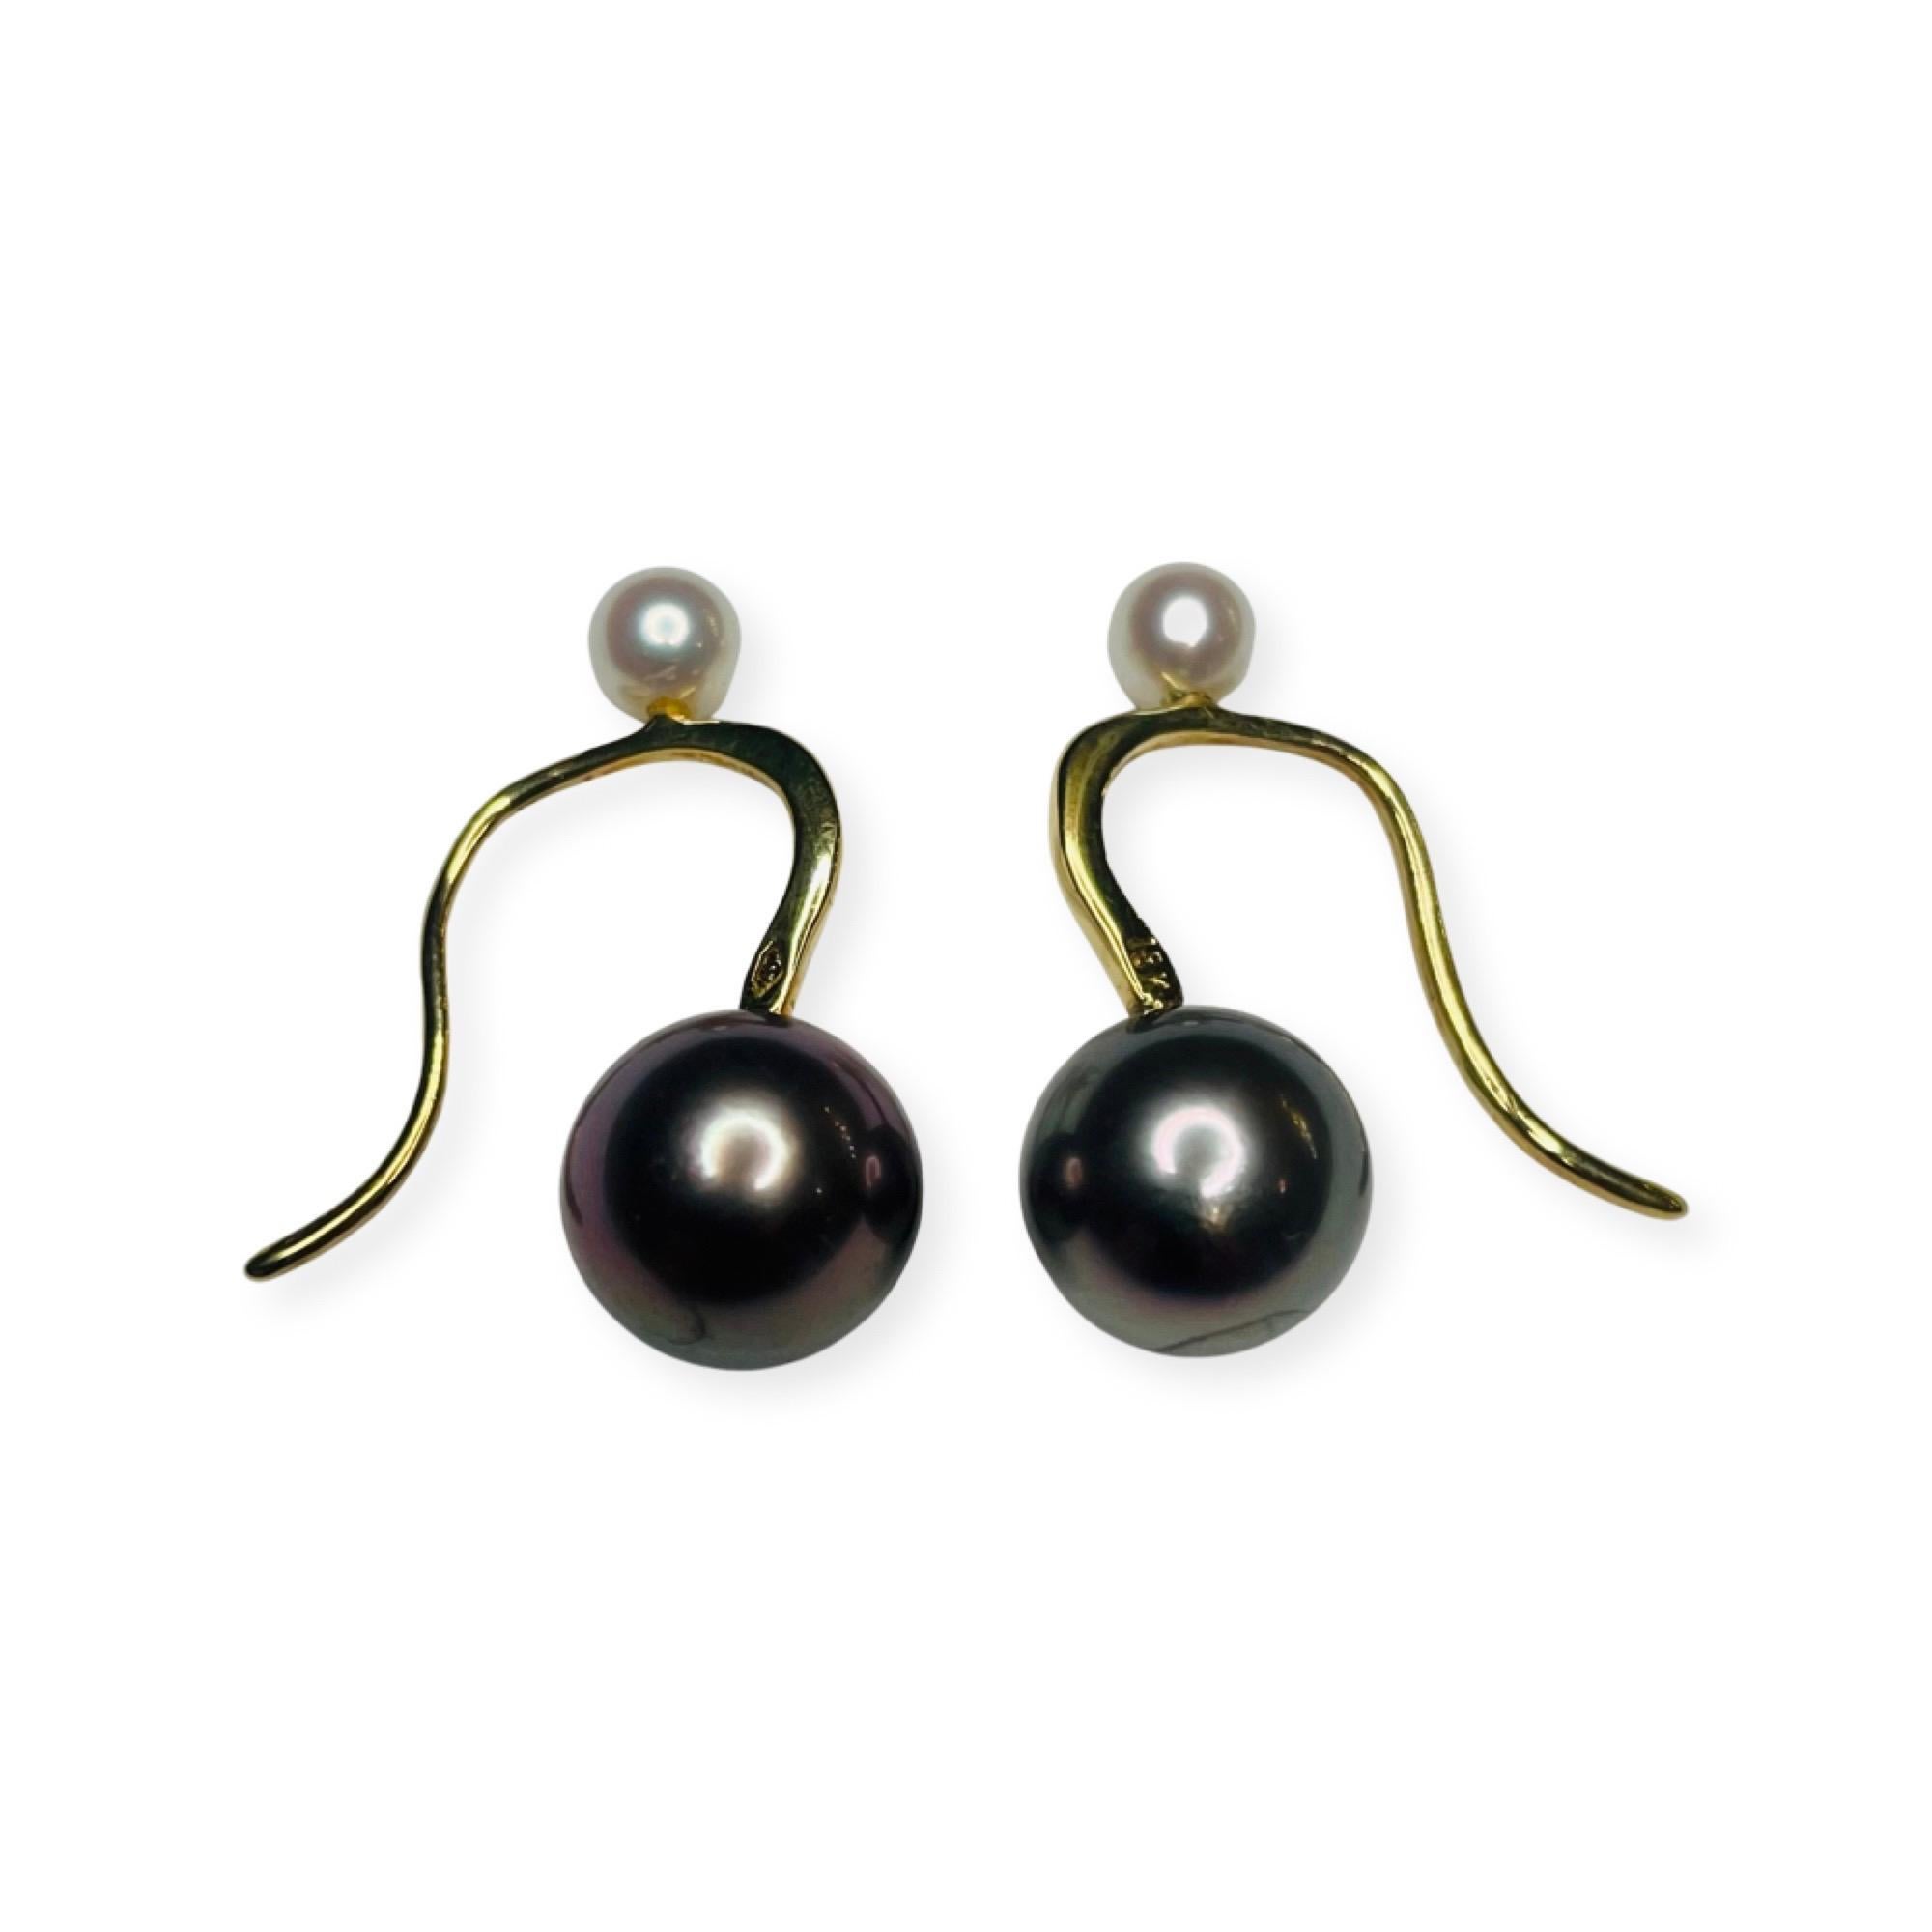 Lithos 18K Yellow Gold, Natural Color, Cultured, Black Tahitian Pearl and Japanese Akoya Earring. The two Tahitian pearls measure 10.0-10.5 mm. These pearls are slightly off round with slight blemishes, medium luster and a poe rava overtone. There